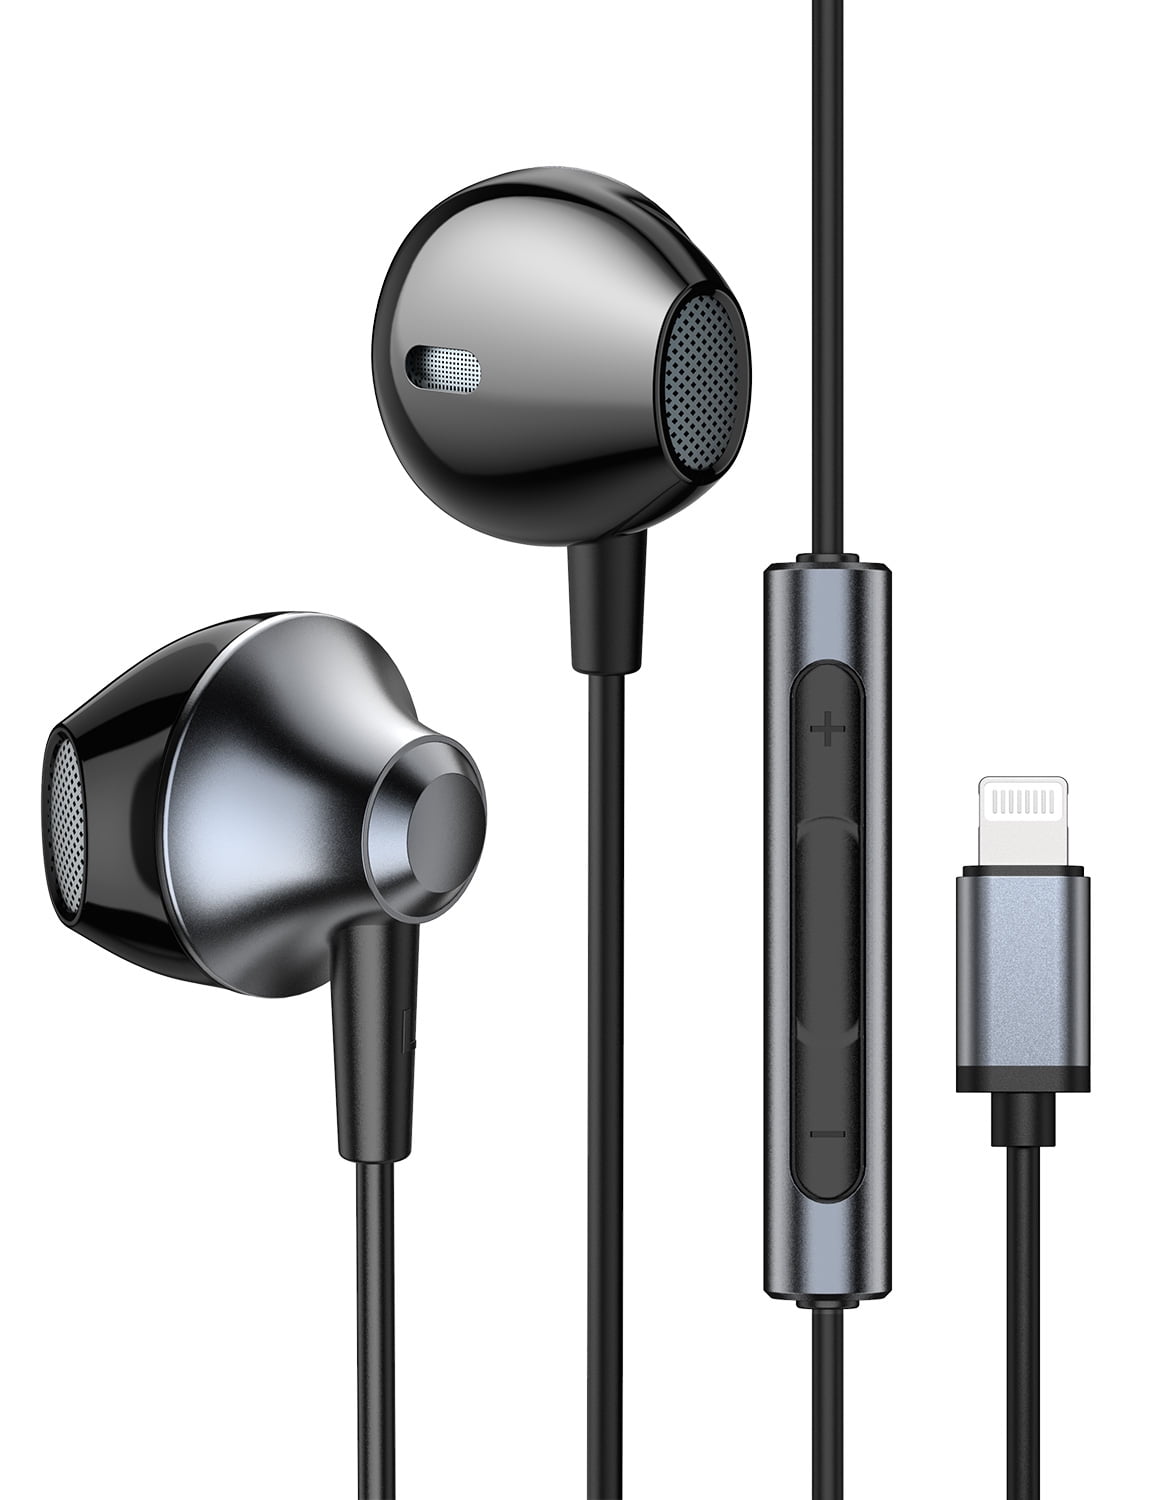 【2Pack】Earphones for iPhone In-Ear Headphones 3.5mm Microphone & Call & Volume Control Headphone/Earbuds/Headset Plug And Play for iPhone 6s/plus/6/5s/se/5c/Samsung/MP3/Android/PC Projection Screens